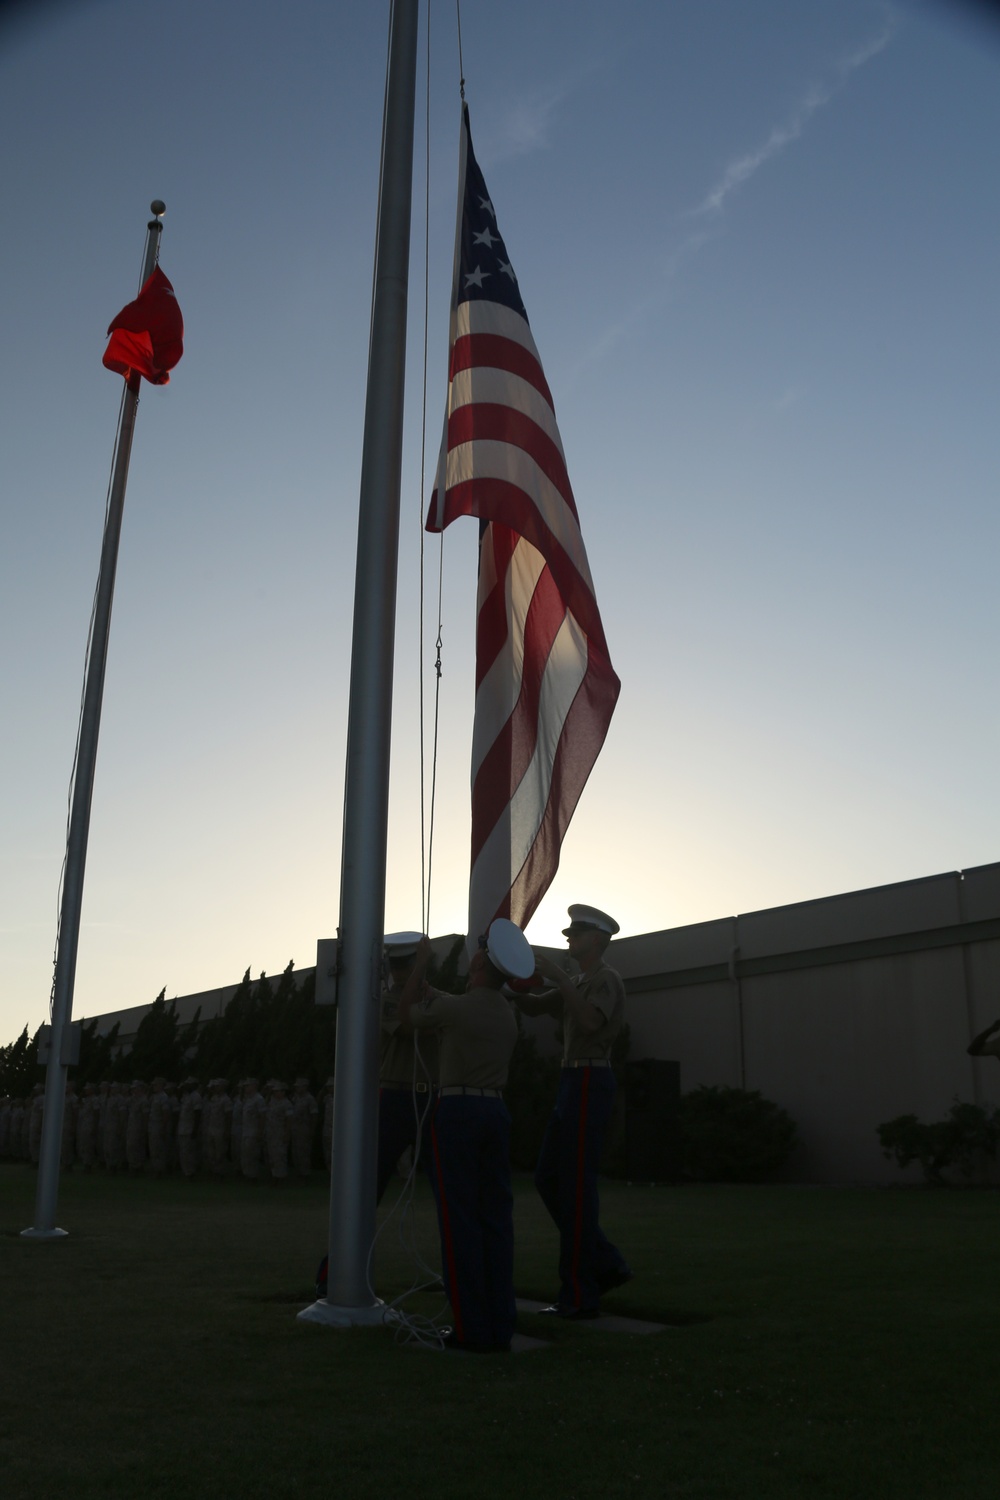 MCAS Miramar, 3rd MAW welcomes Medal of Honor recipient for evening colors ceremony